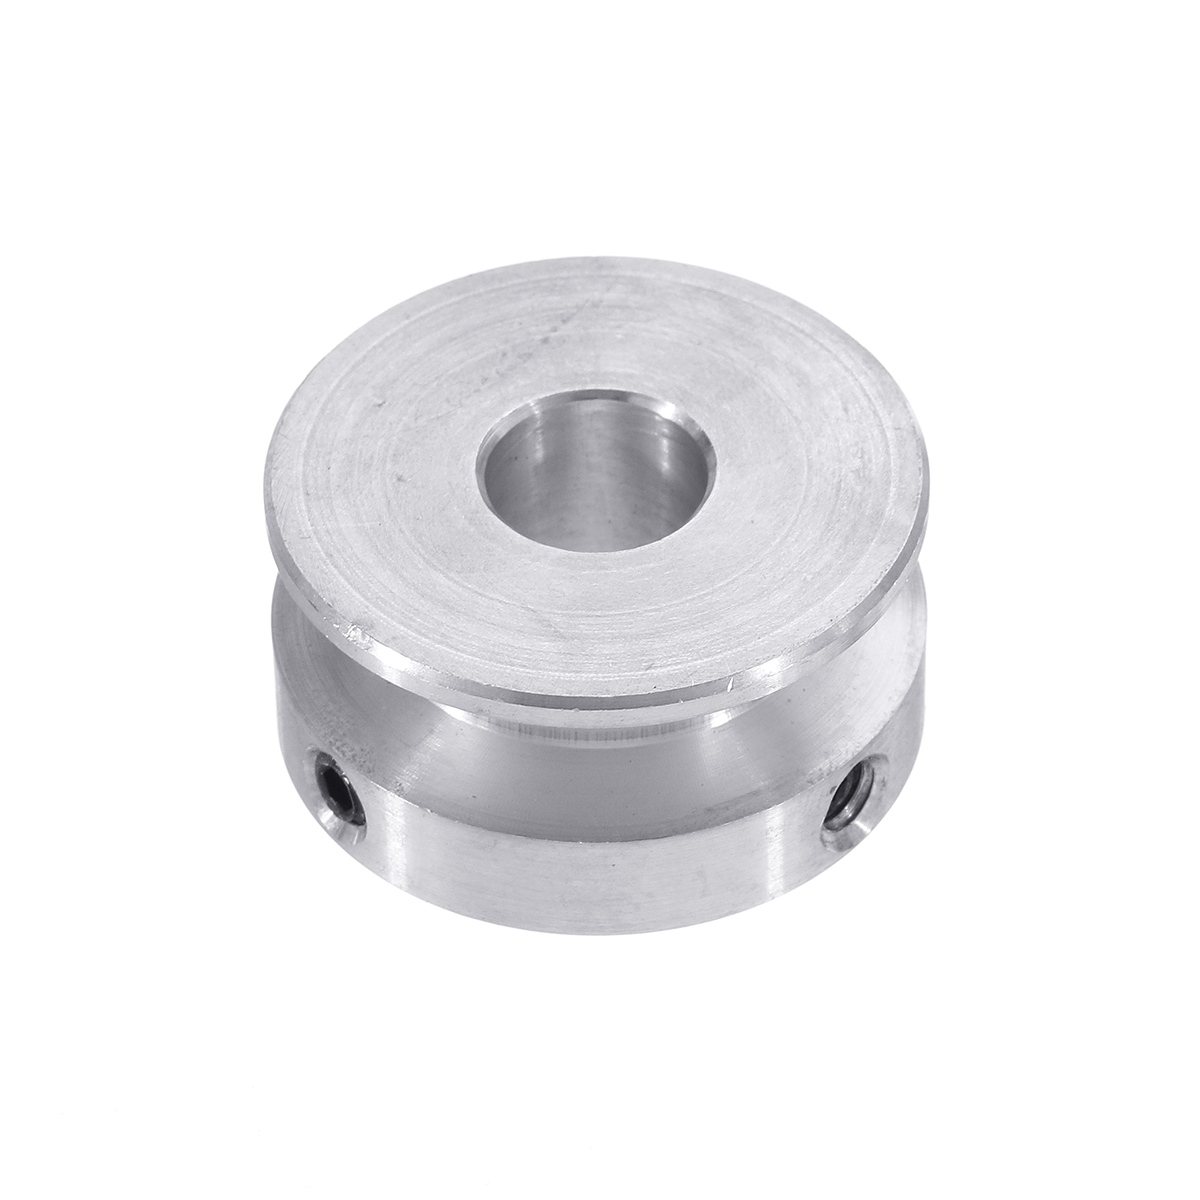 30MM-Single-Groove-Pulley-4-16MM-Fixed-Bore-Pulley-Wheel-for-Motor-Shaft-6MM-Belt-1561882-4